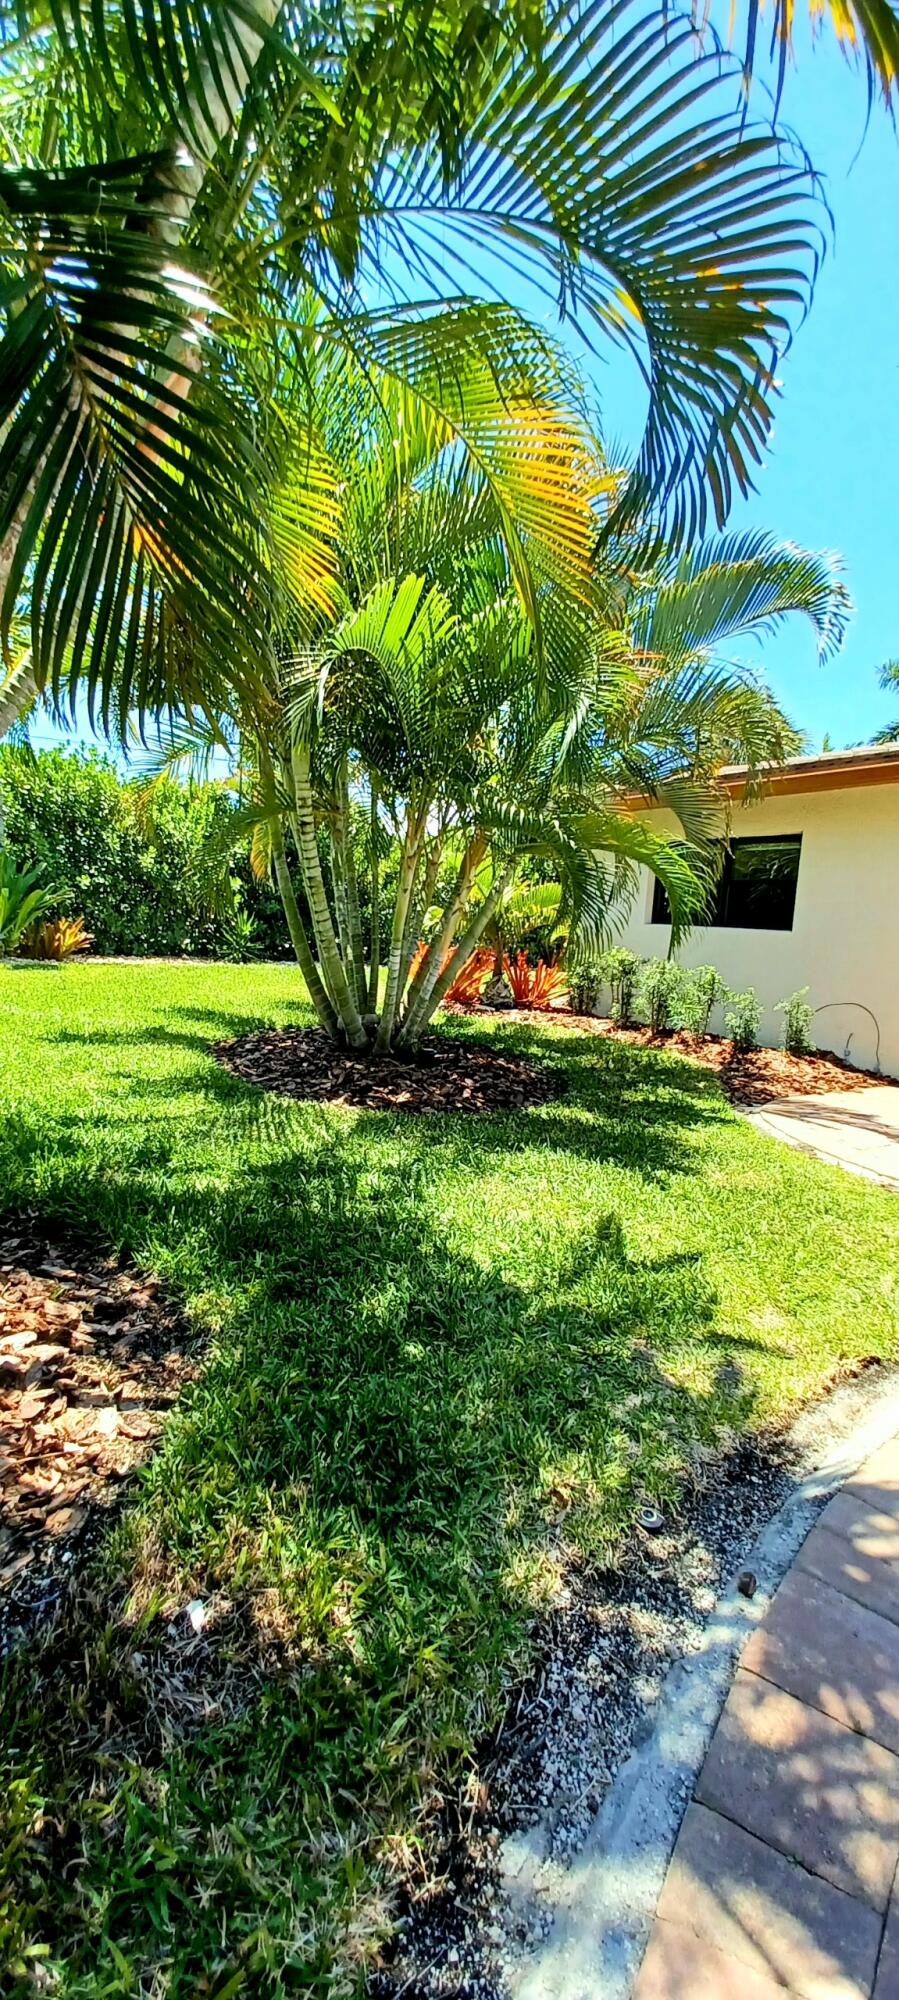 336 Bamboo Road #Cottage, Palm Beach Shores FL 33404